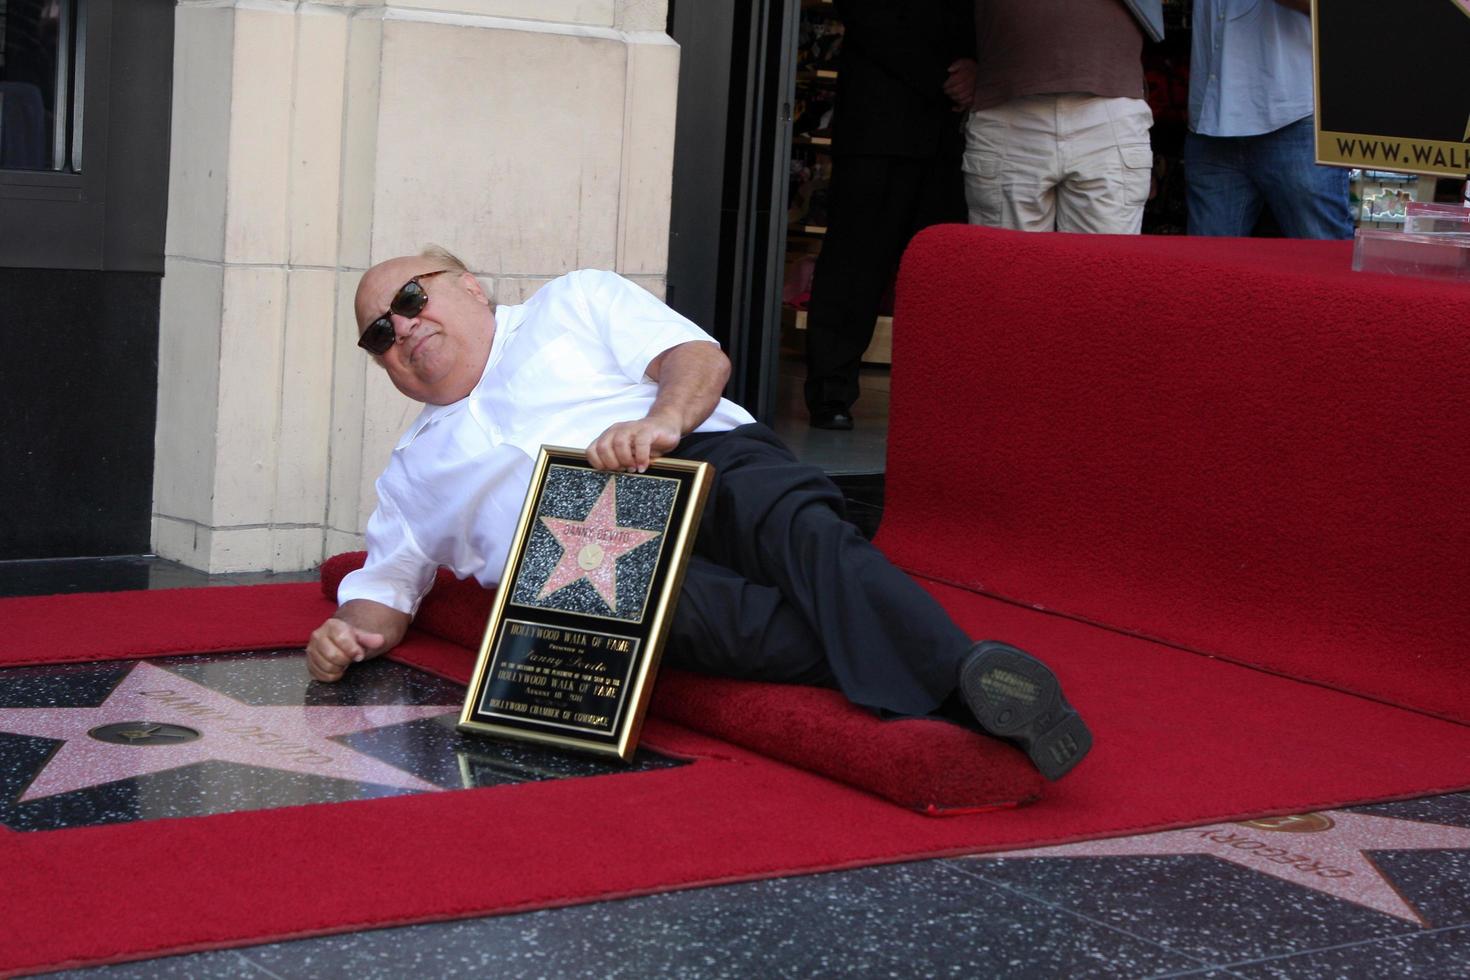 LOS ANGELES, AUG 18 - Danny DeVito at the ceremony as Danny DeVito Receives a Star at Hollywood Walk of Fame on the August 18, 2011 in Los Angeles, CA photo